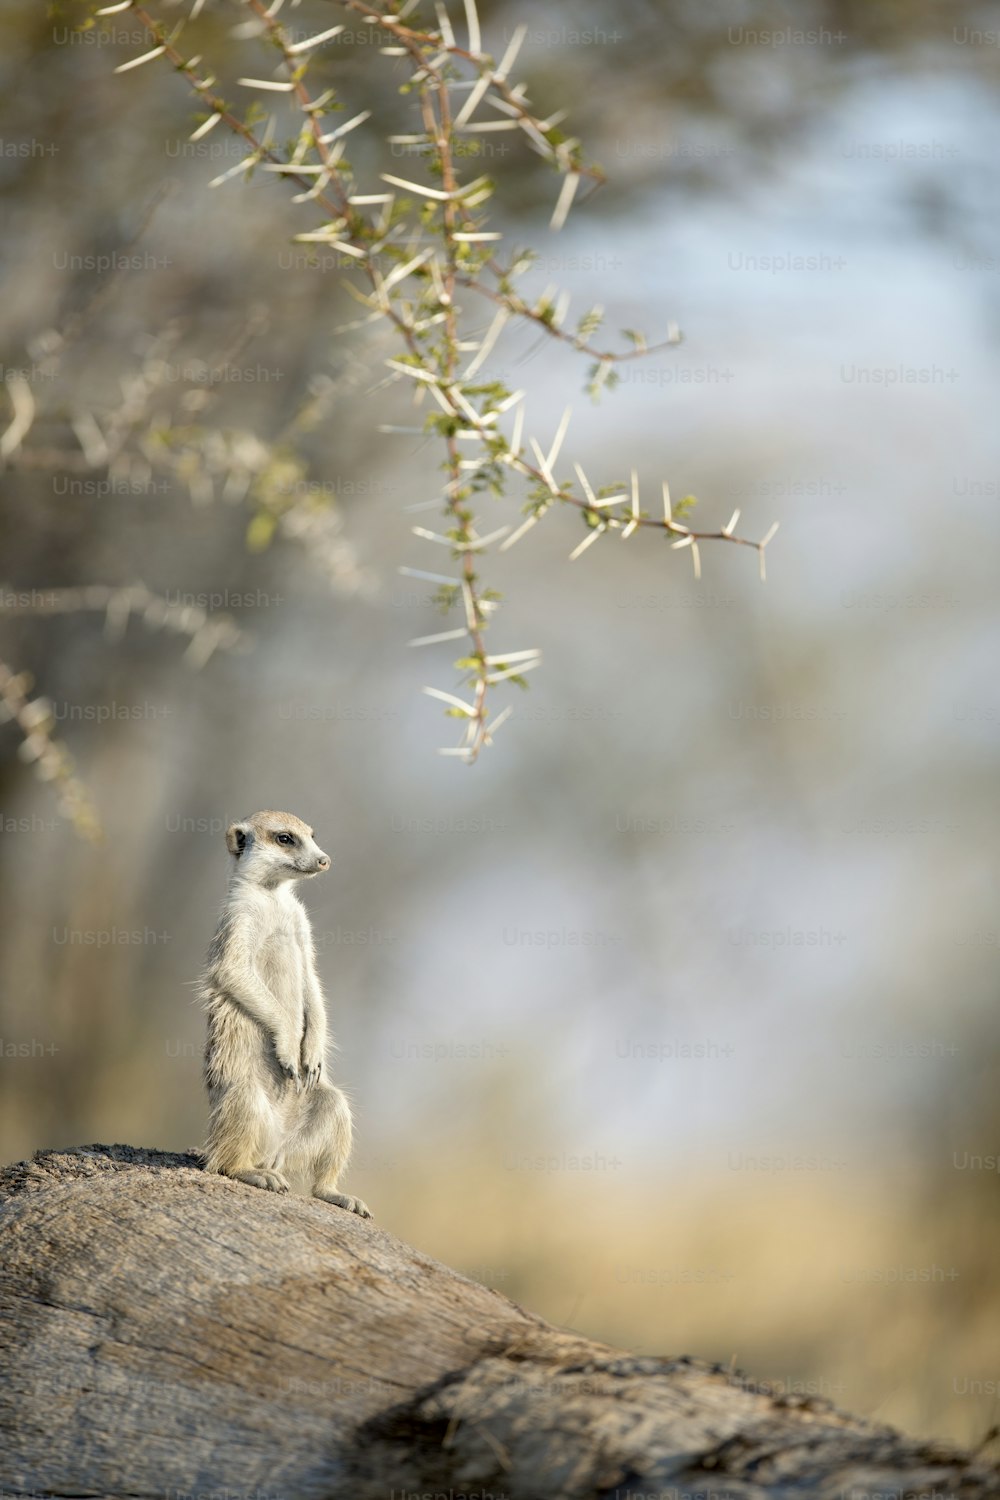 A Meerkat bathing in the first sunlight of day.